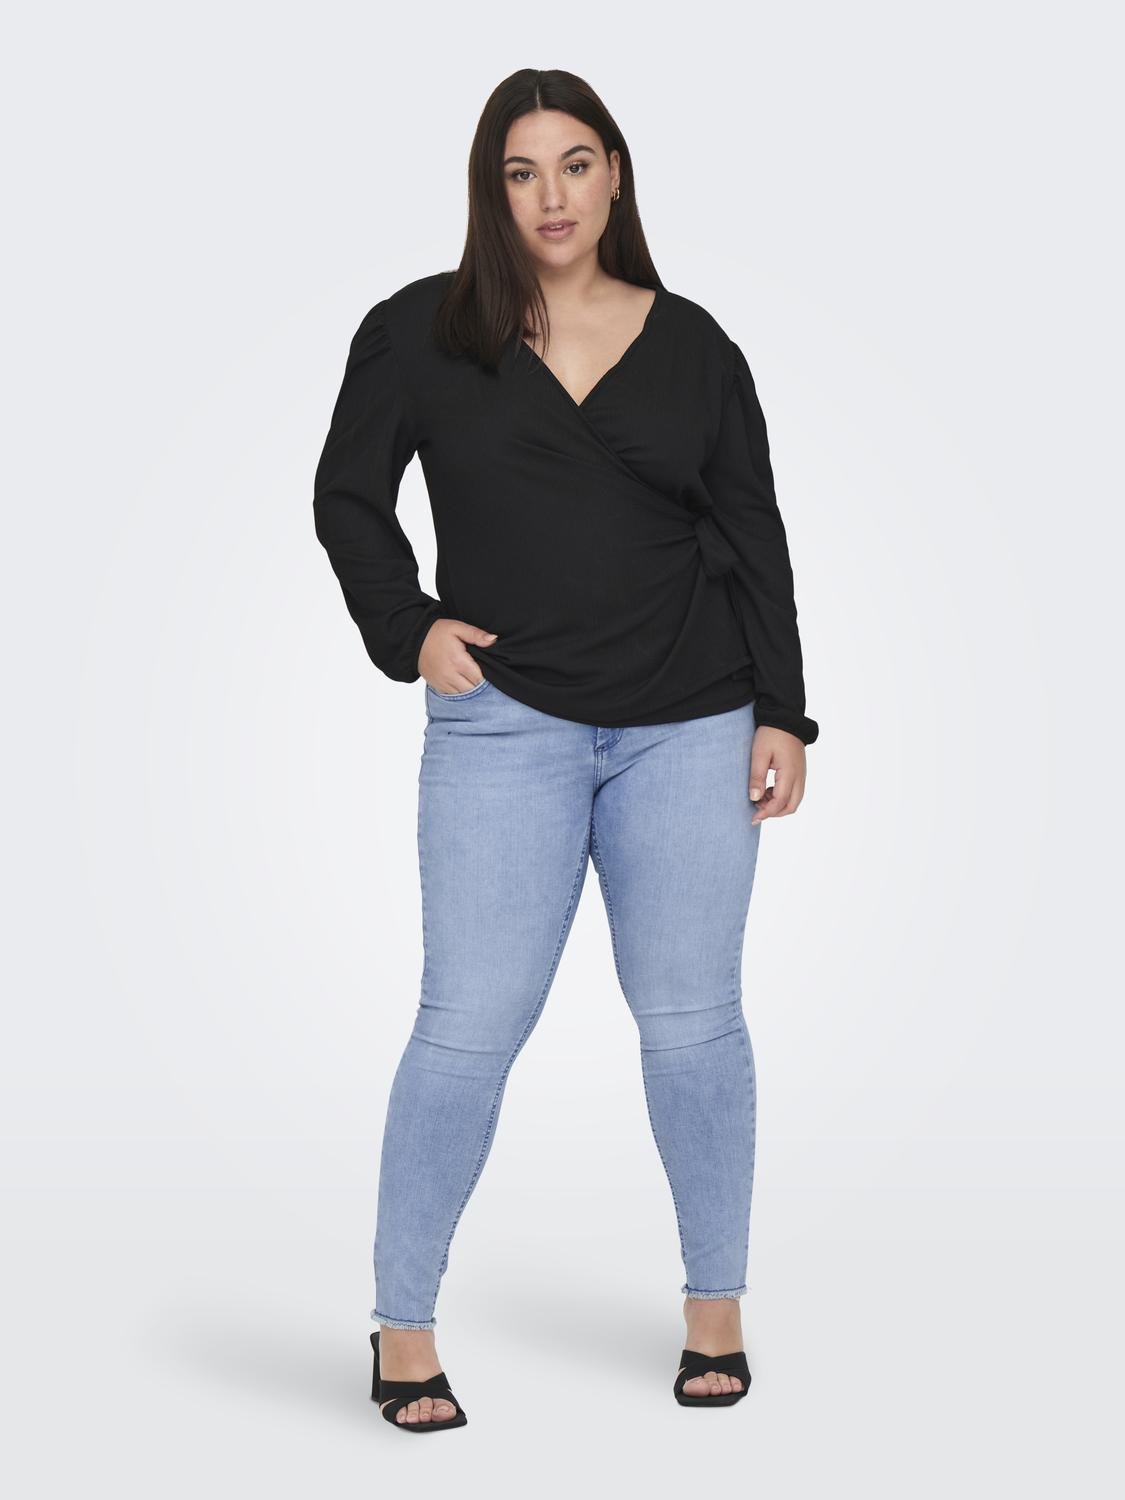 ONLY Curvy Wrap Top -Black - 15312266